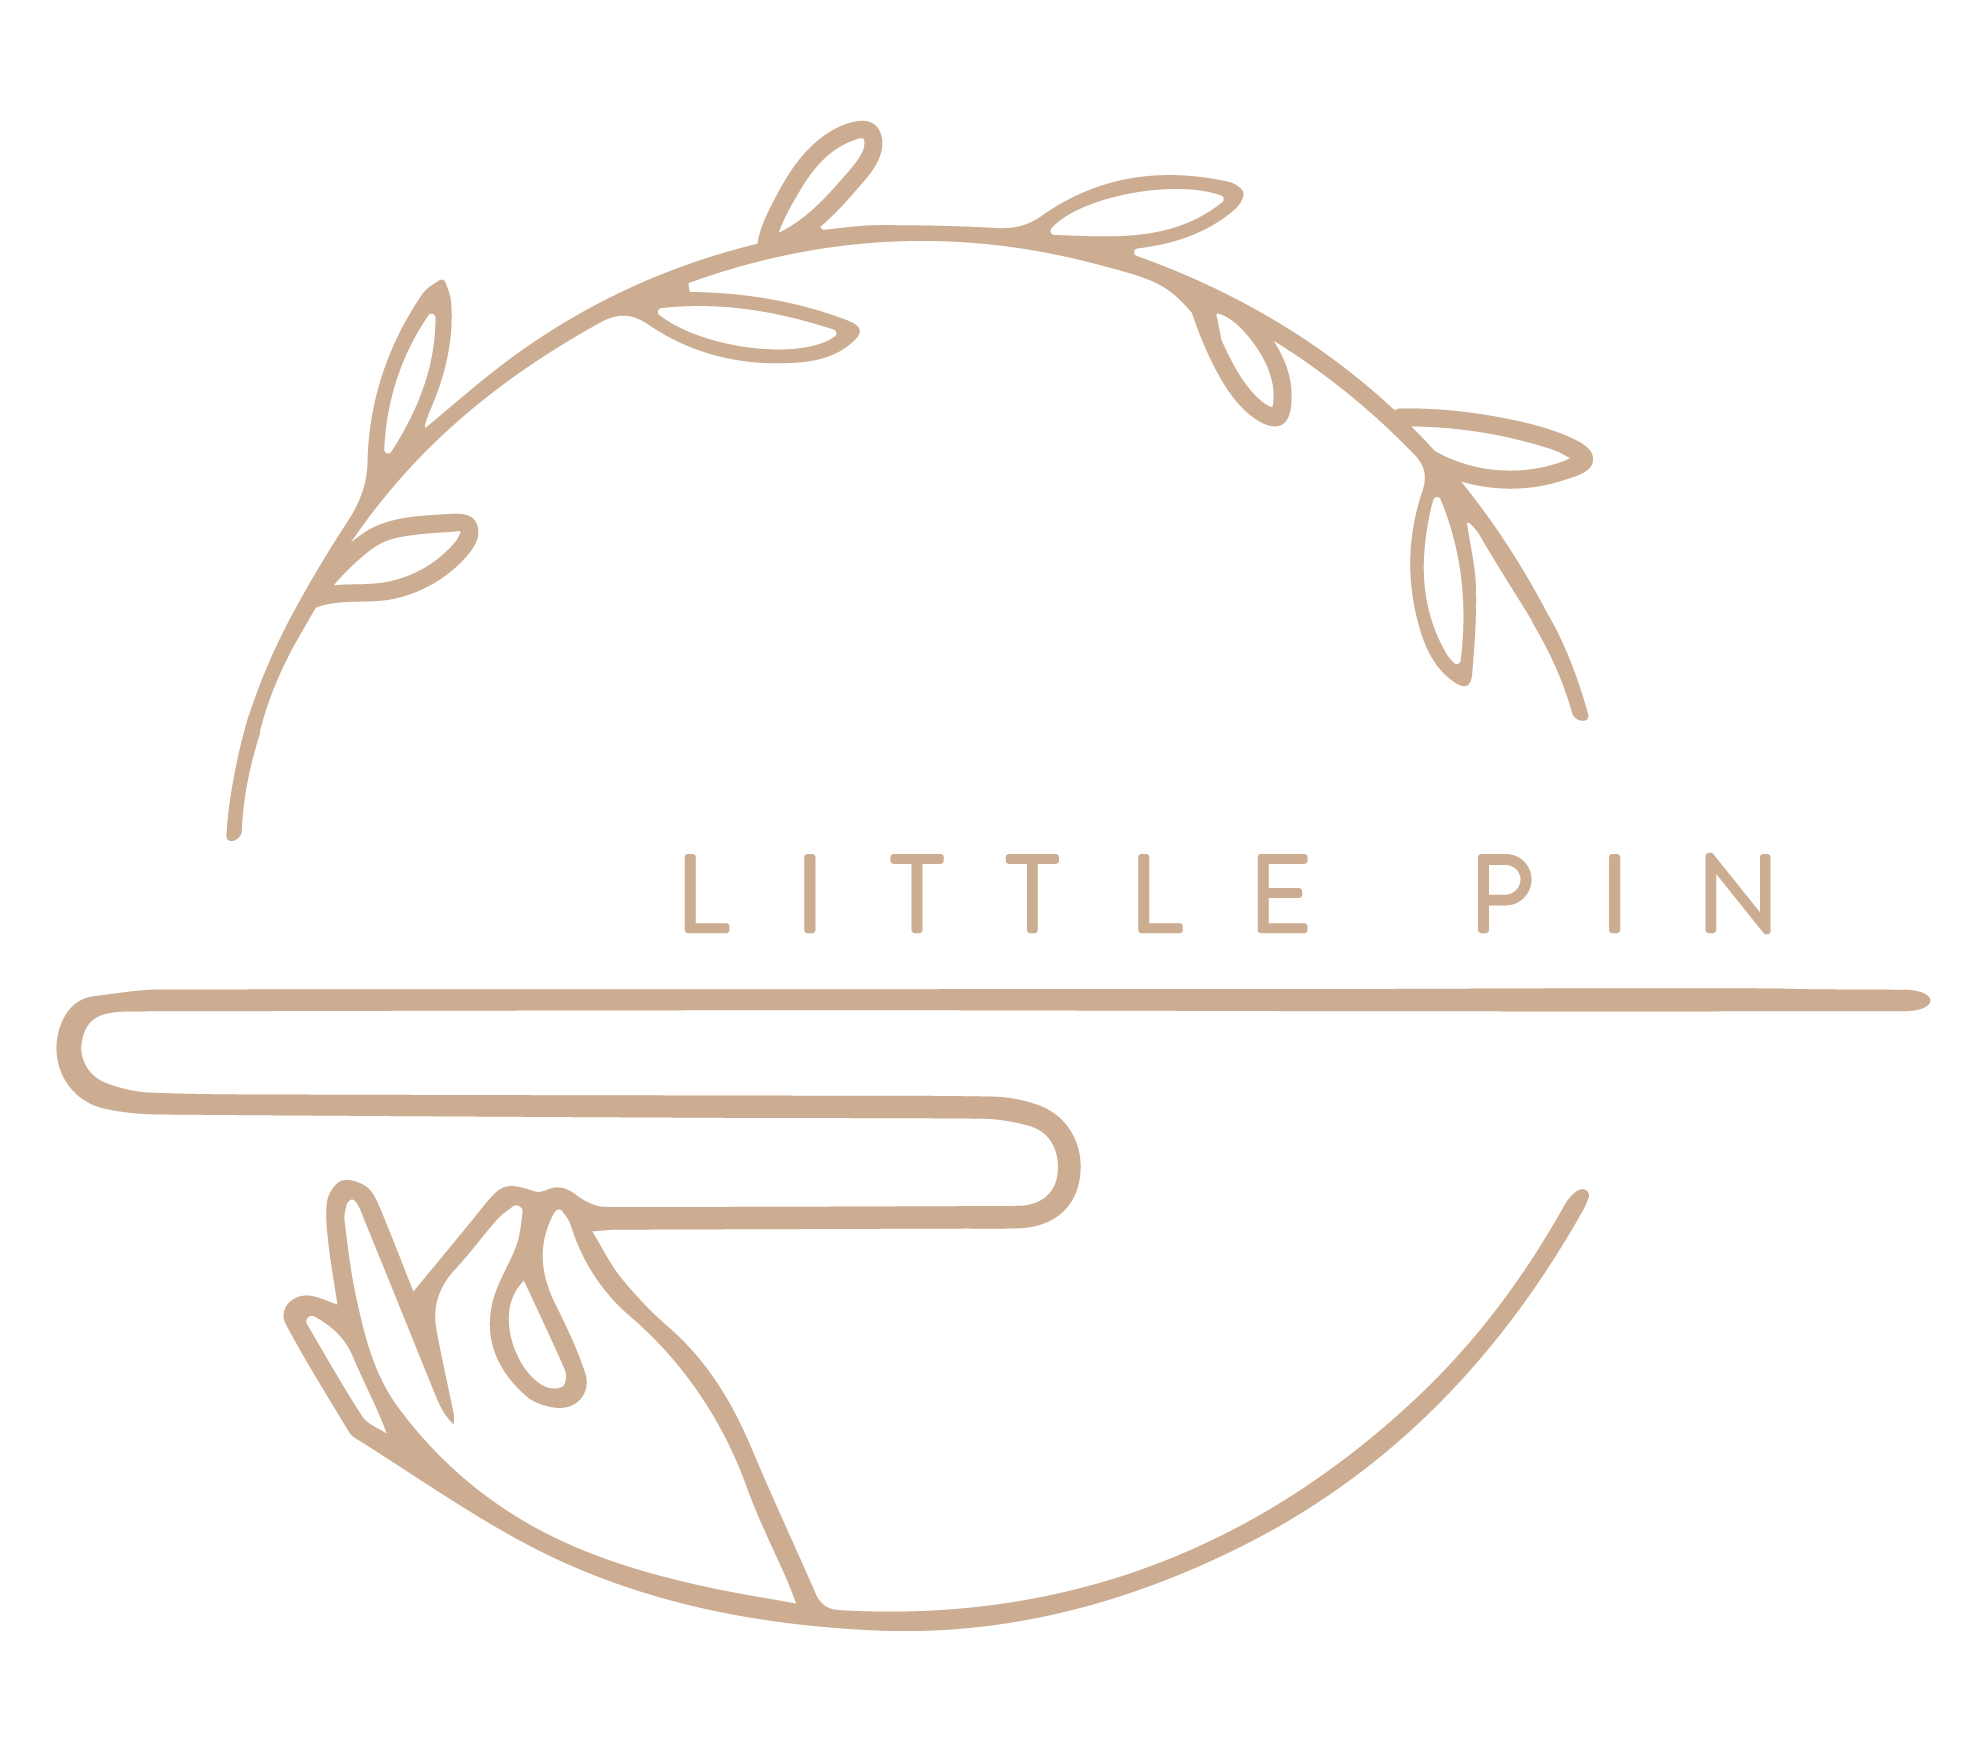  The Little Pin